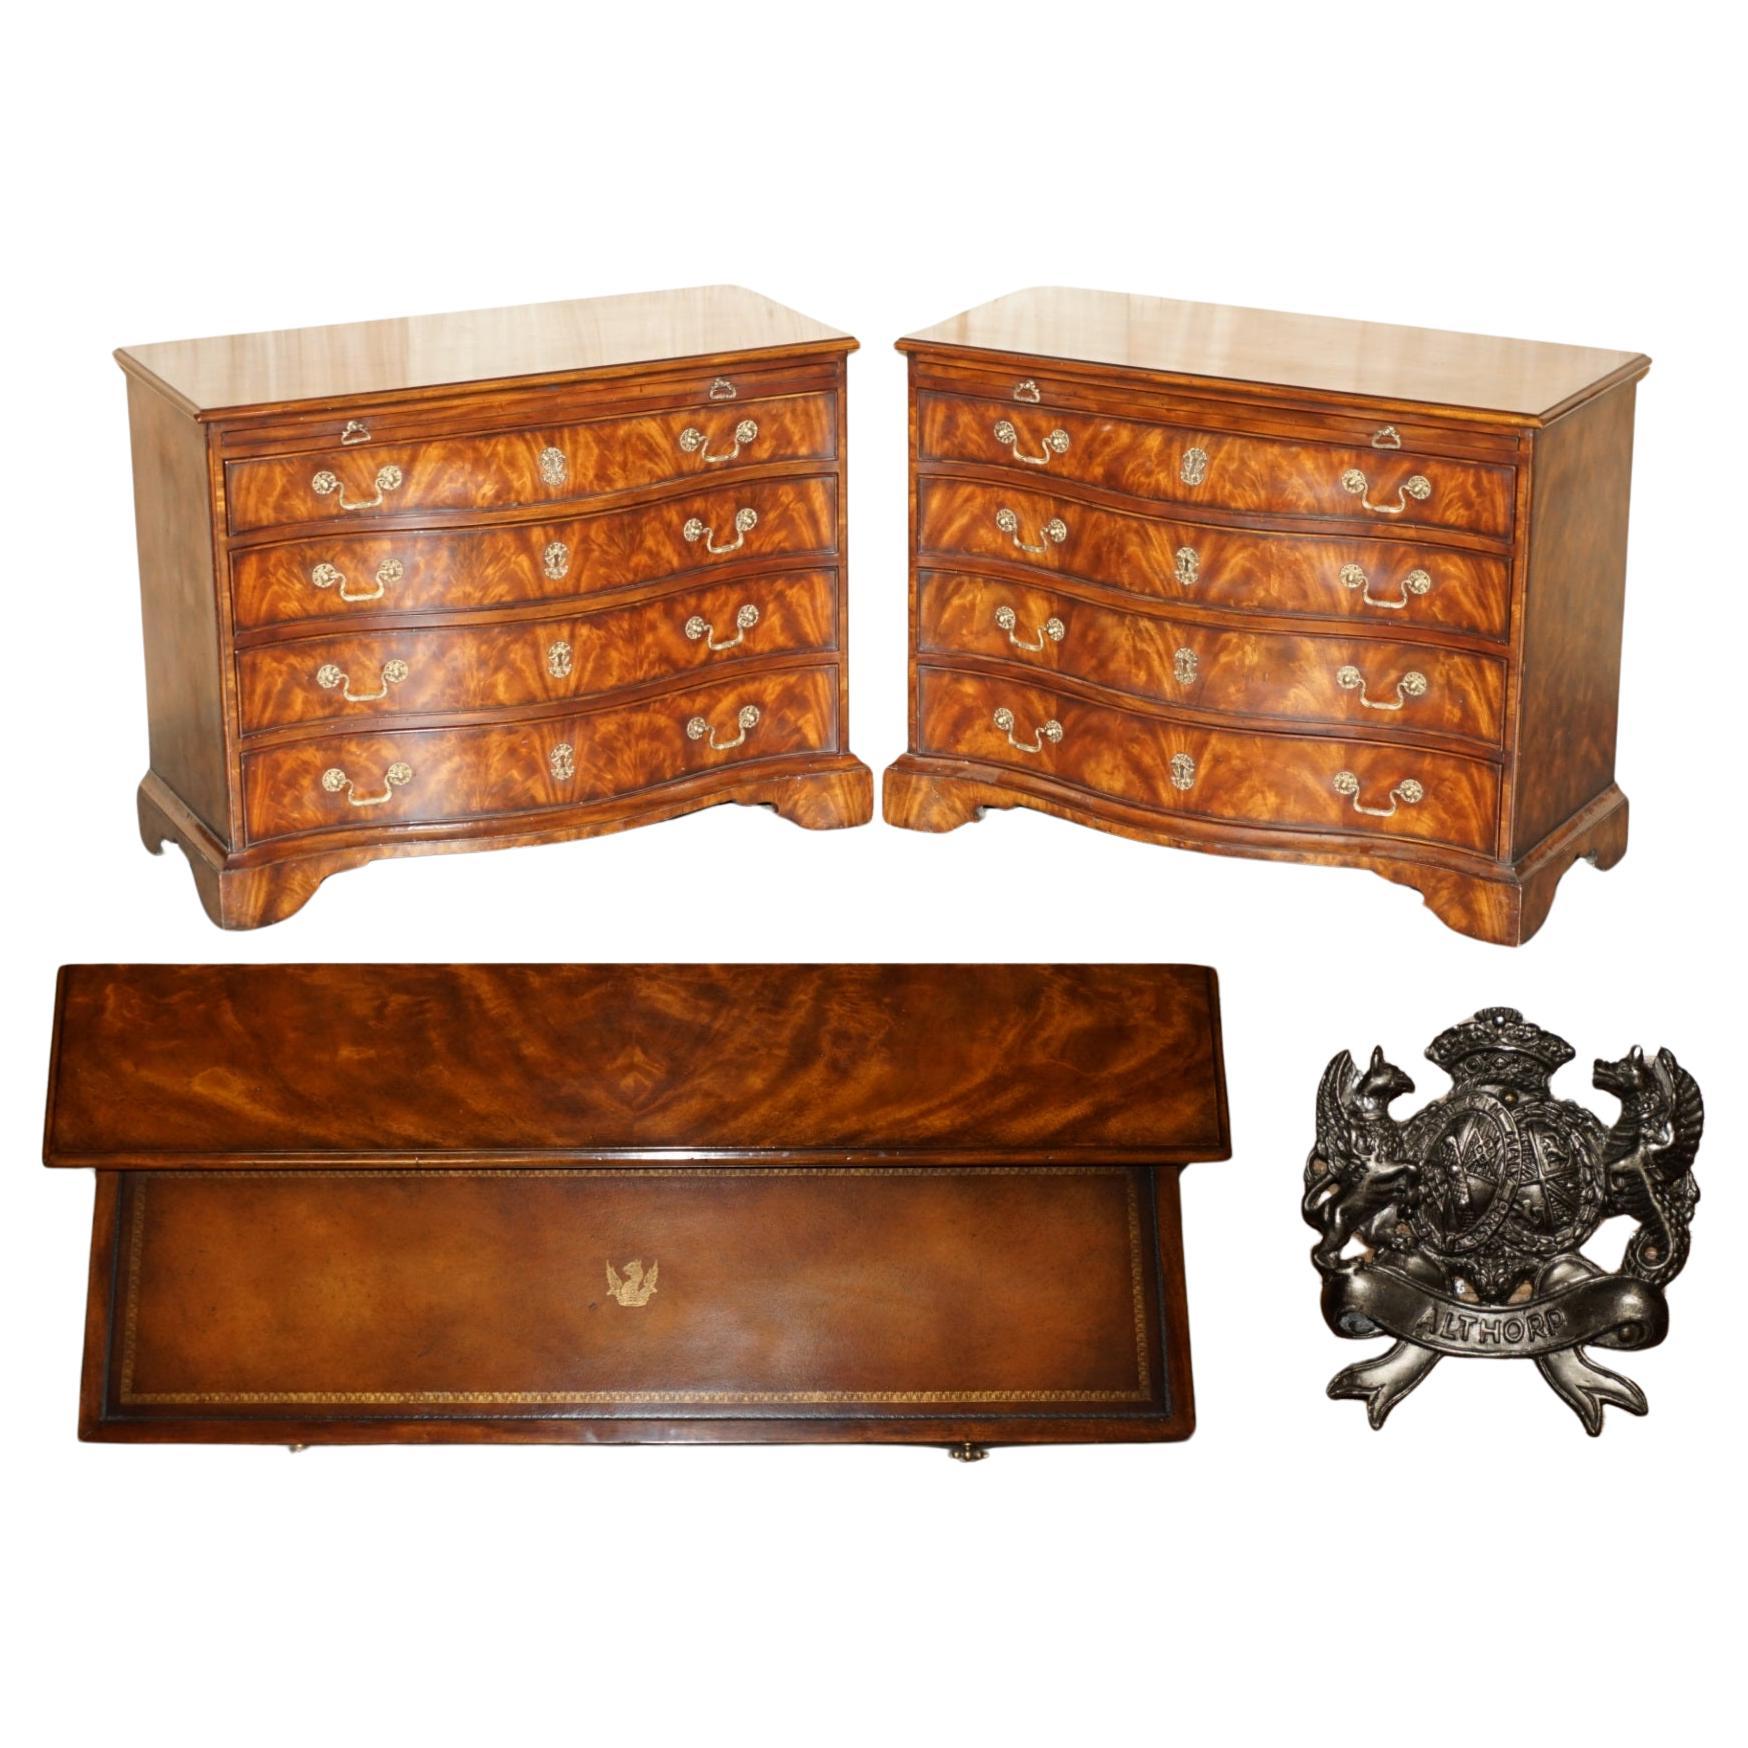 FINE PAIR OF ALTHORP SPENCER HOUSE FLAMED HARDWOOD SERPENTINE CHEST OF DRAWERs For Sale